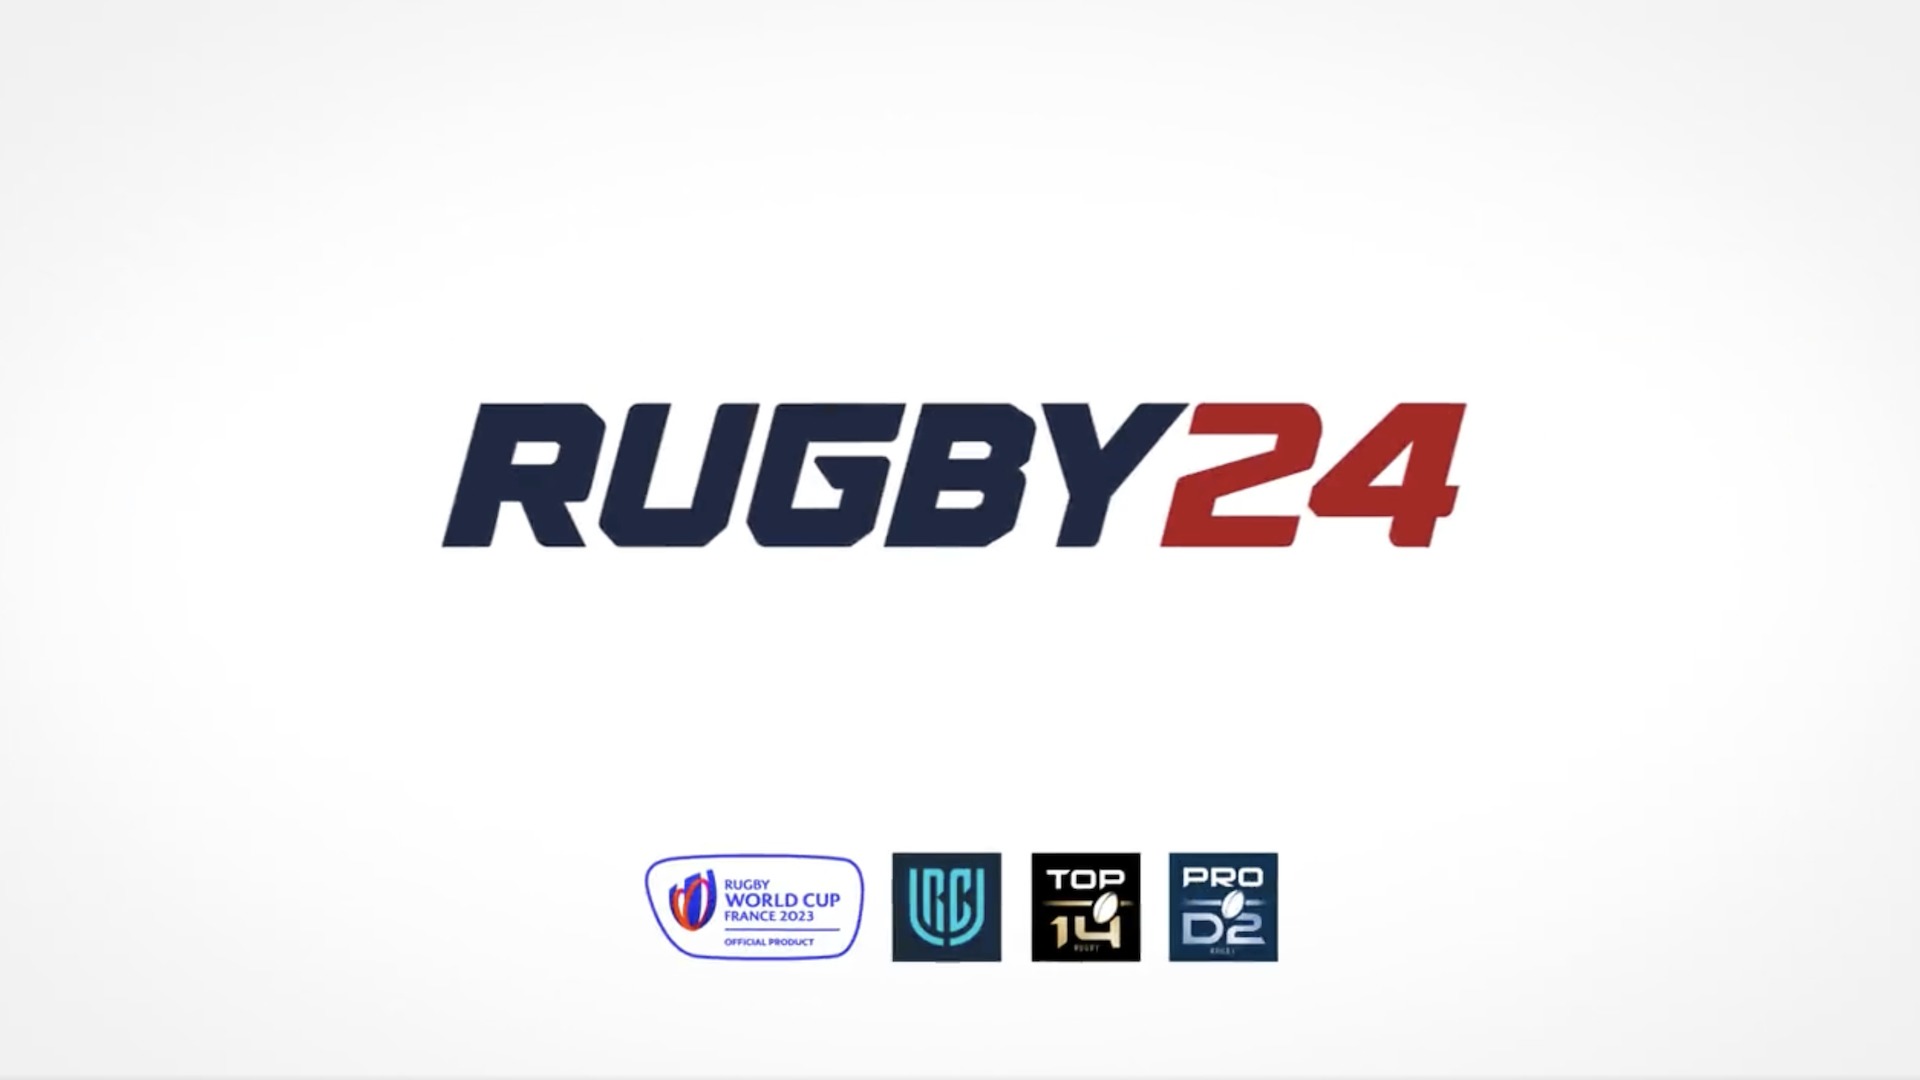 Latest update on new rugby video game is hugely promising